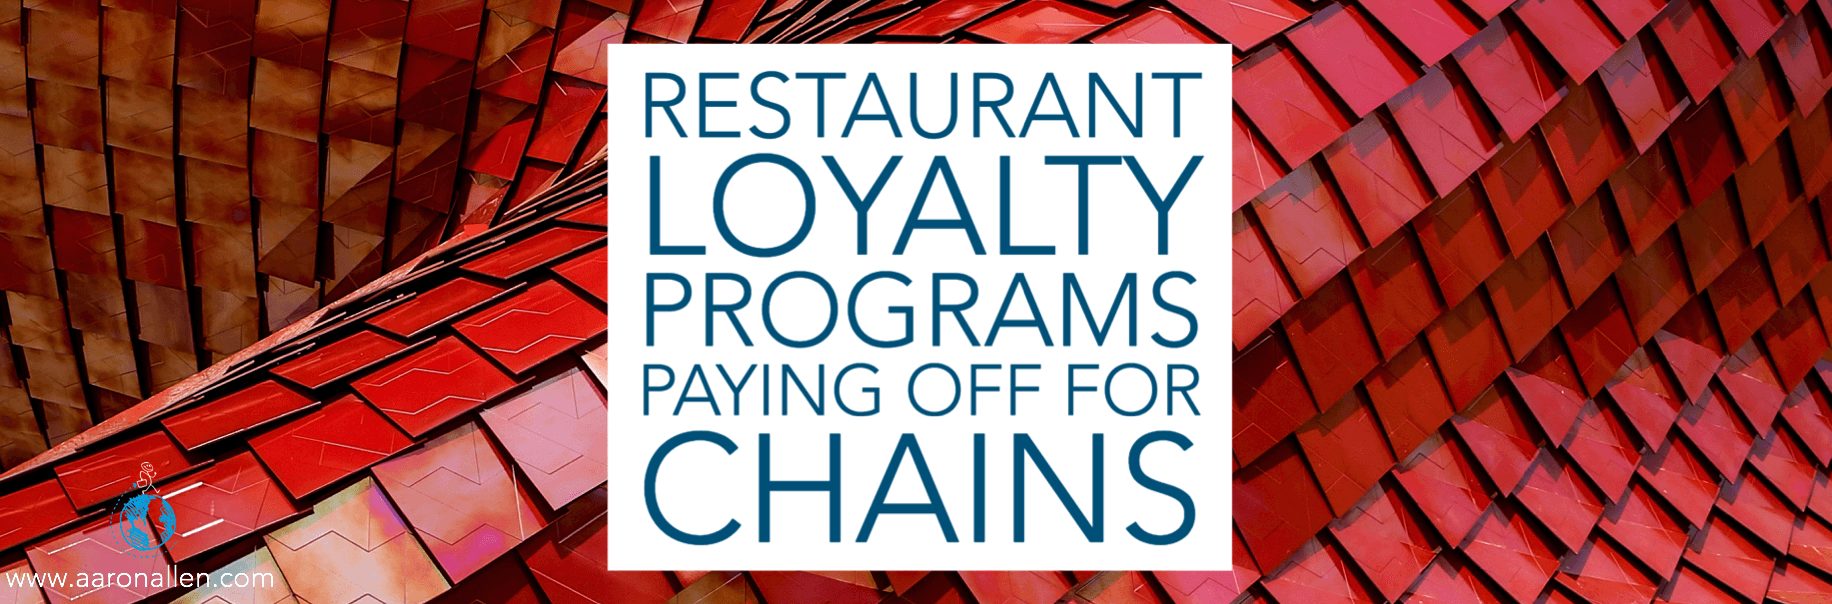 Restaurant Loyalty Programs Paying Off for Chains